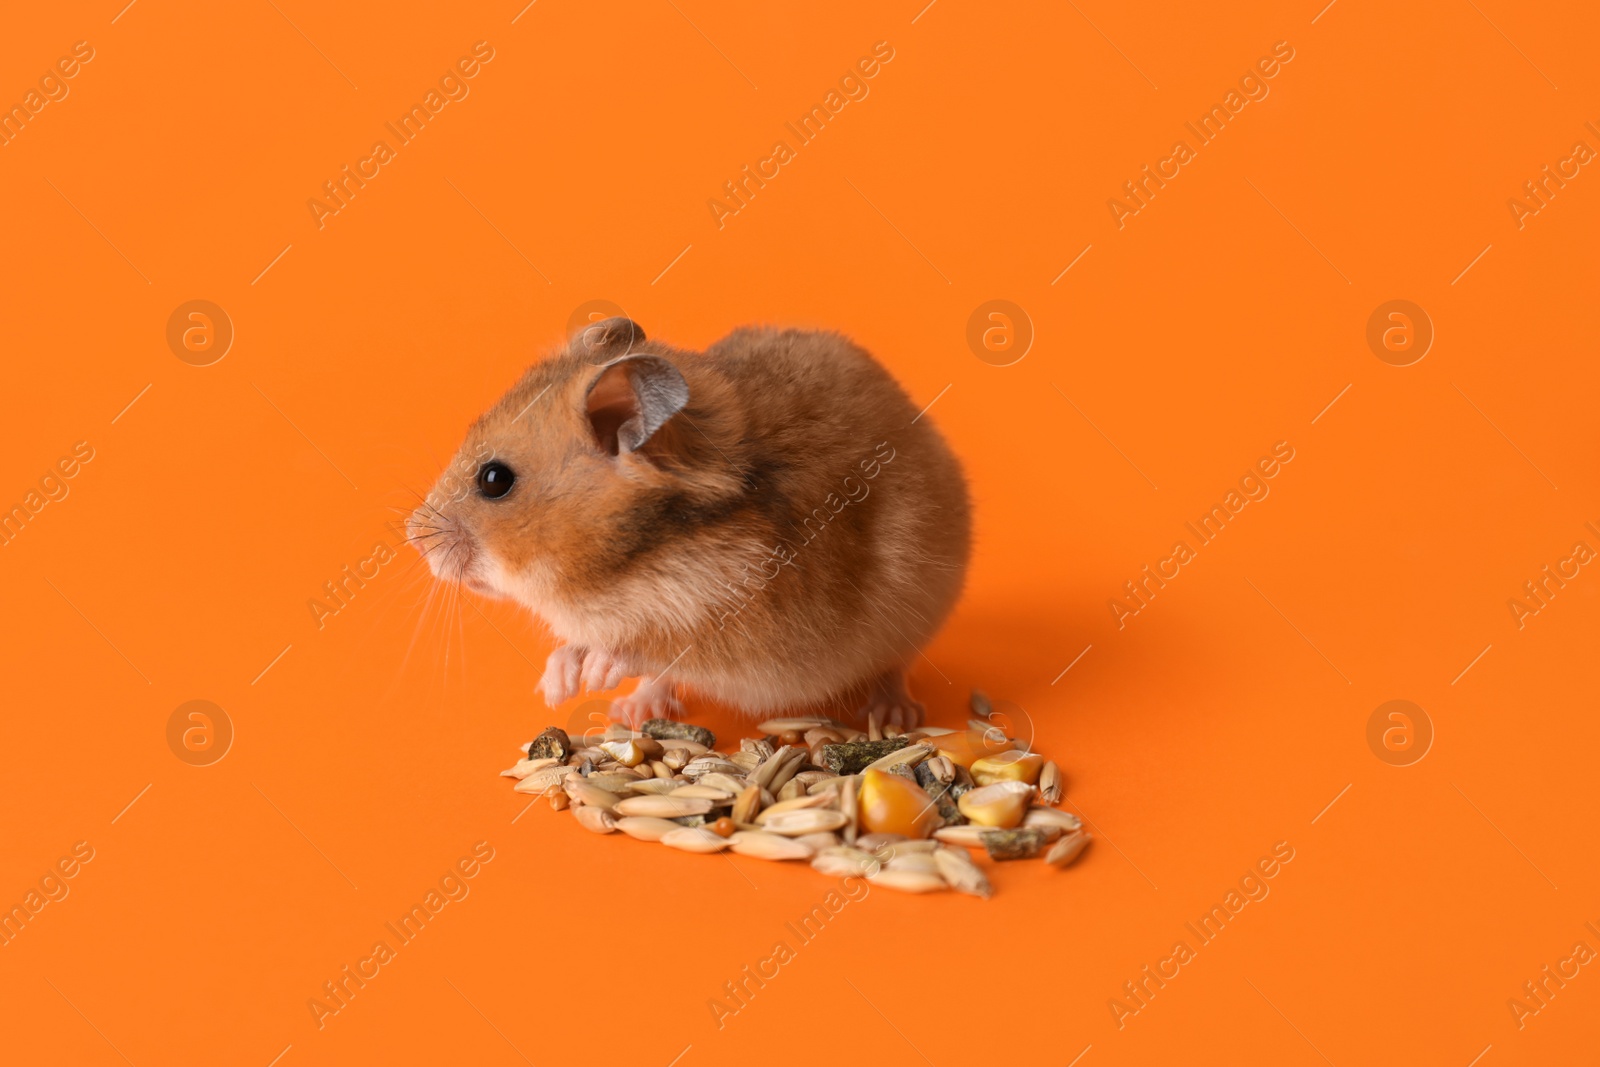 Photo of Adorable hamster and pile of seeds on orange background